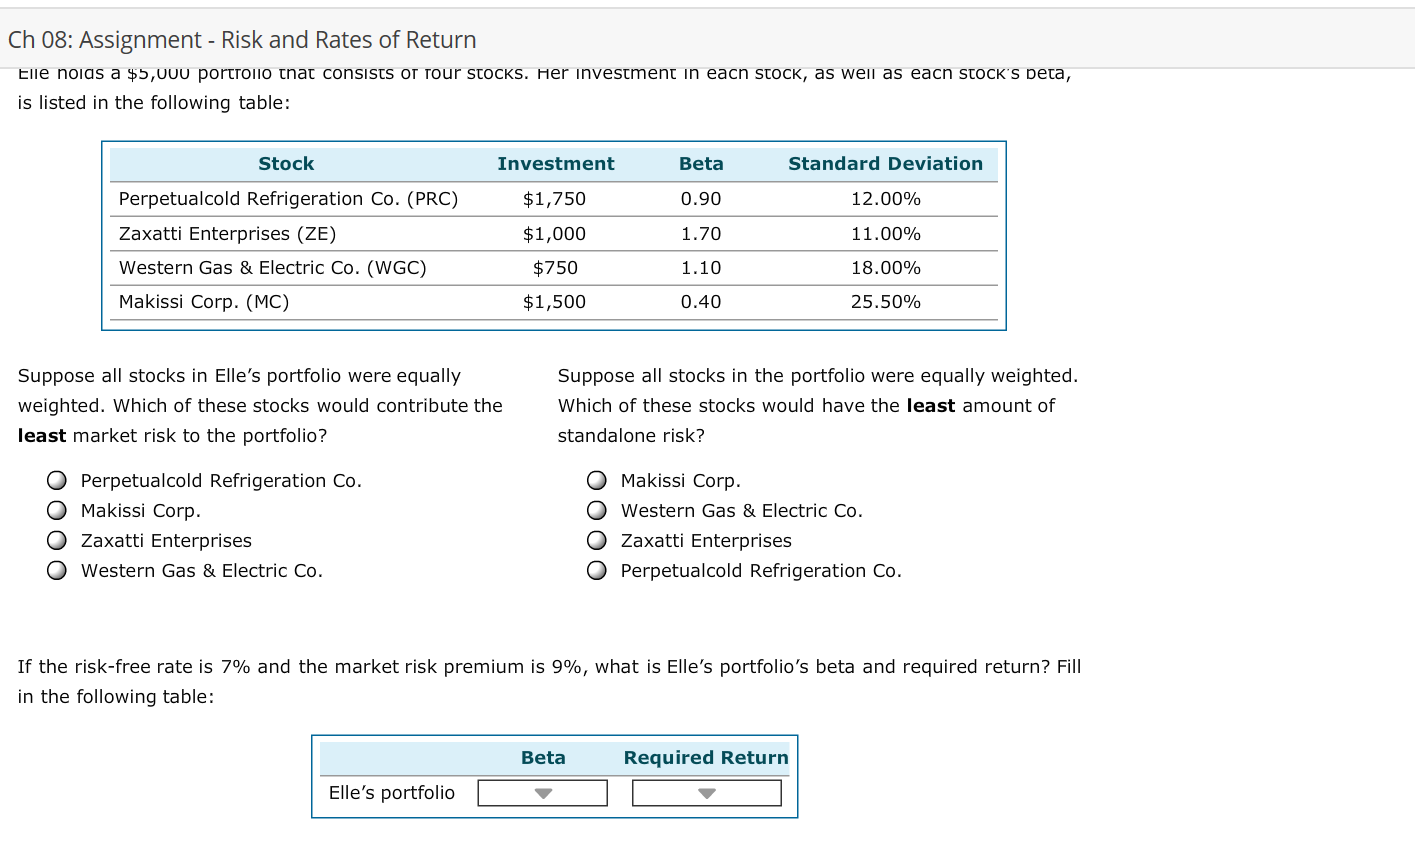 Ch 08: Assignment - Risk and Rates of Return
Elle nolas a $5,000 portrollo that consists or rOur stocKs. Her investment in eacn stock, as well as each stock's beta,
is listed in the following table:
Standard Deviation
Stock
Investment
Beta
Perpetualcold Refrigeration Co. (PRC)
$1,750
0.90
12.00%
Zaxatti Enterprises (ZE)
1.70
$1,000
11.00%
Western Gas & Electric Co. (WGC)
$750
1.10
18.00%
Makissi Corp. (MC)
$1,500
0.40
25.50%
Suppose all stocks in the portfolio were equally weighted
Suppose all stocks in Elle's portfolio were equally
weighted. Which of these stocks would contribute the
Which of these stocks would have the least amount of
least market risk to the portfolio?
standalone risk?
Makissi Corp.
Perpetualcold Refrigeration Co.
Makissi Corp.
Western Gas & Electric Co.
Zaxatti Enterprises
Zaxatti Enterprises
Western Gas & Electric Co
O Perpetualcold Refrigeration Co.
If the risk-free rate is 7% and the market risk premium is 9%, what is Elle's portfolio's beta and required return? Fill
in the following table:
Required Return
Beta
Elle's portfolio
O O O O
